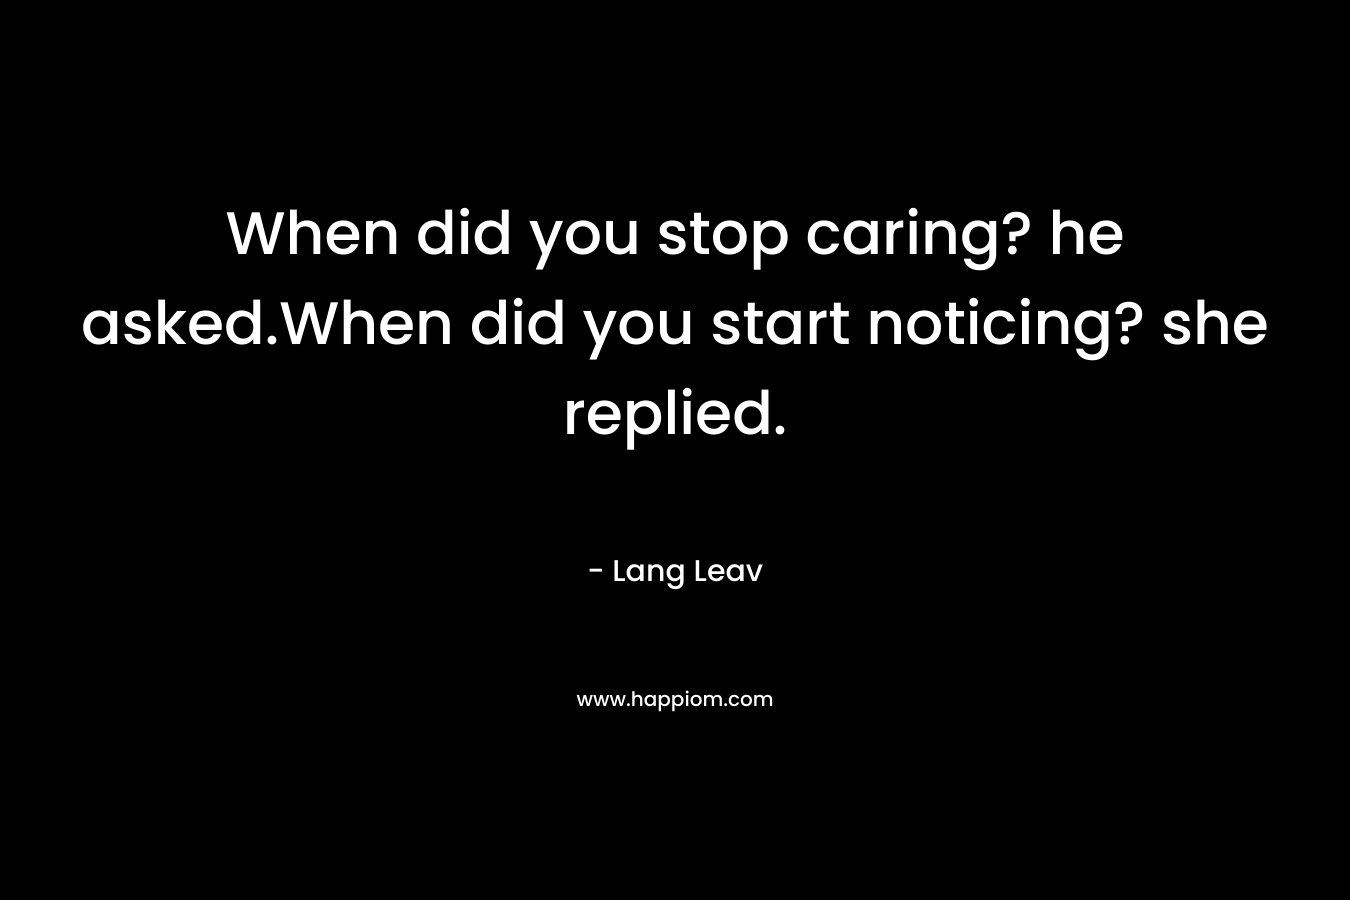 When did you stop caring? he asked.When did you start noticing? she replied.